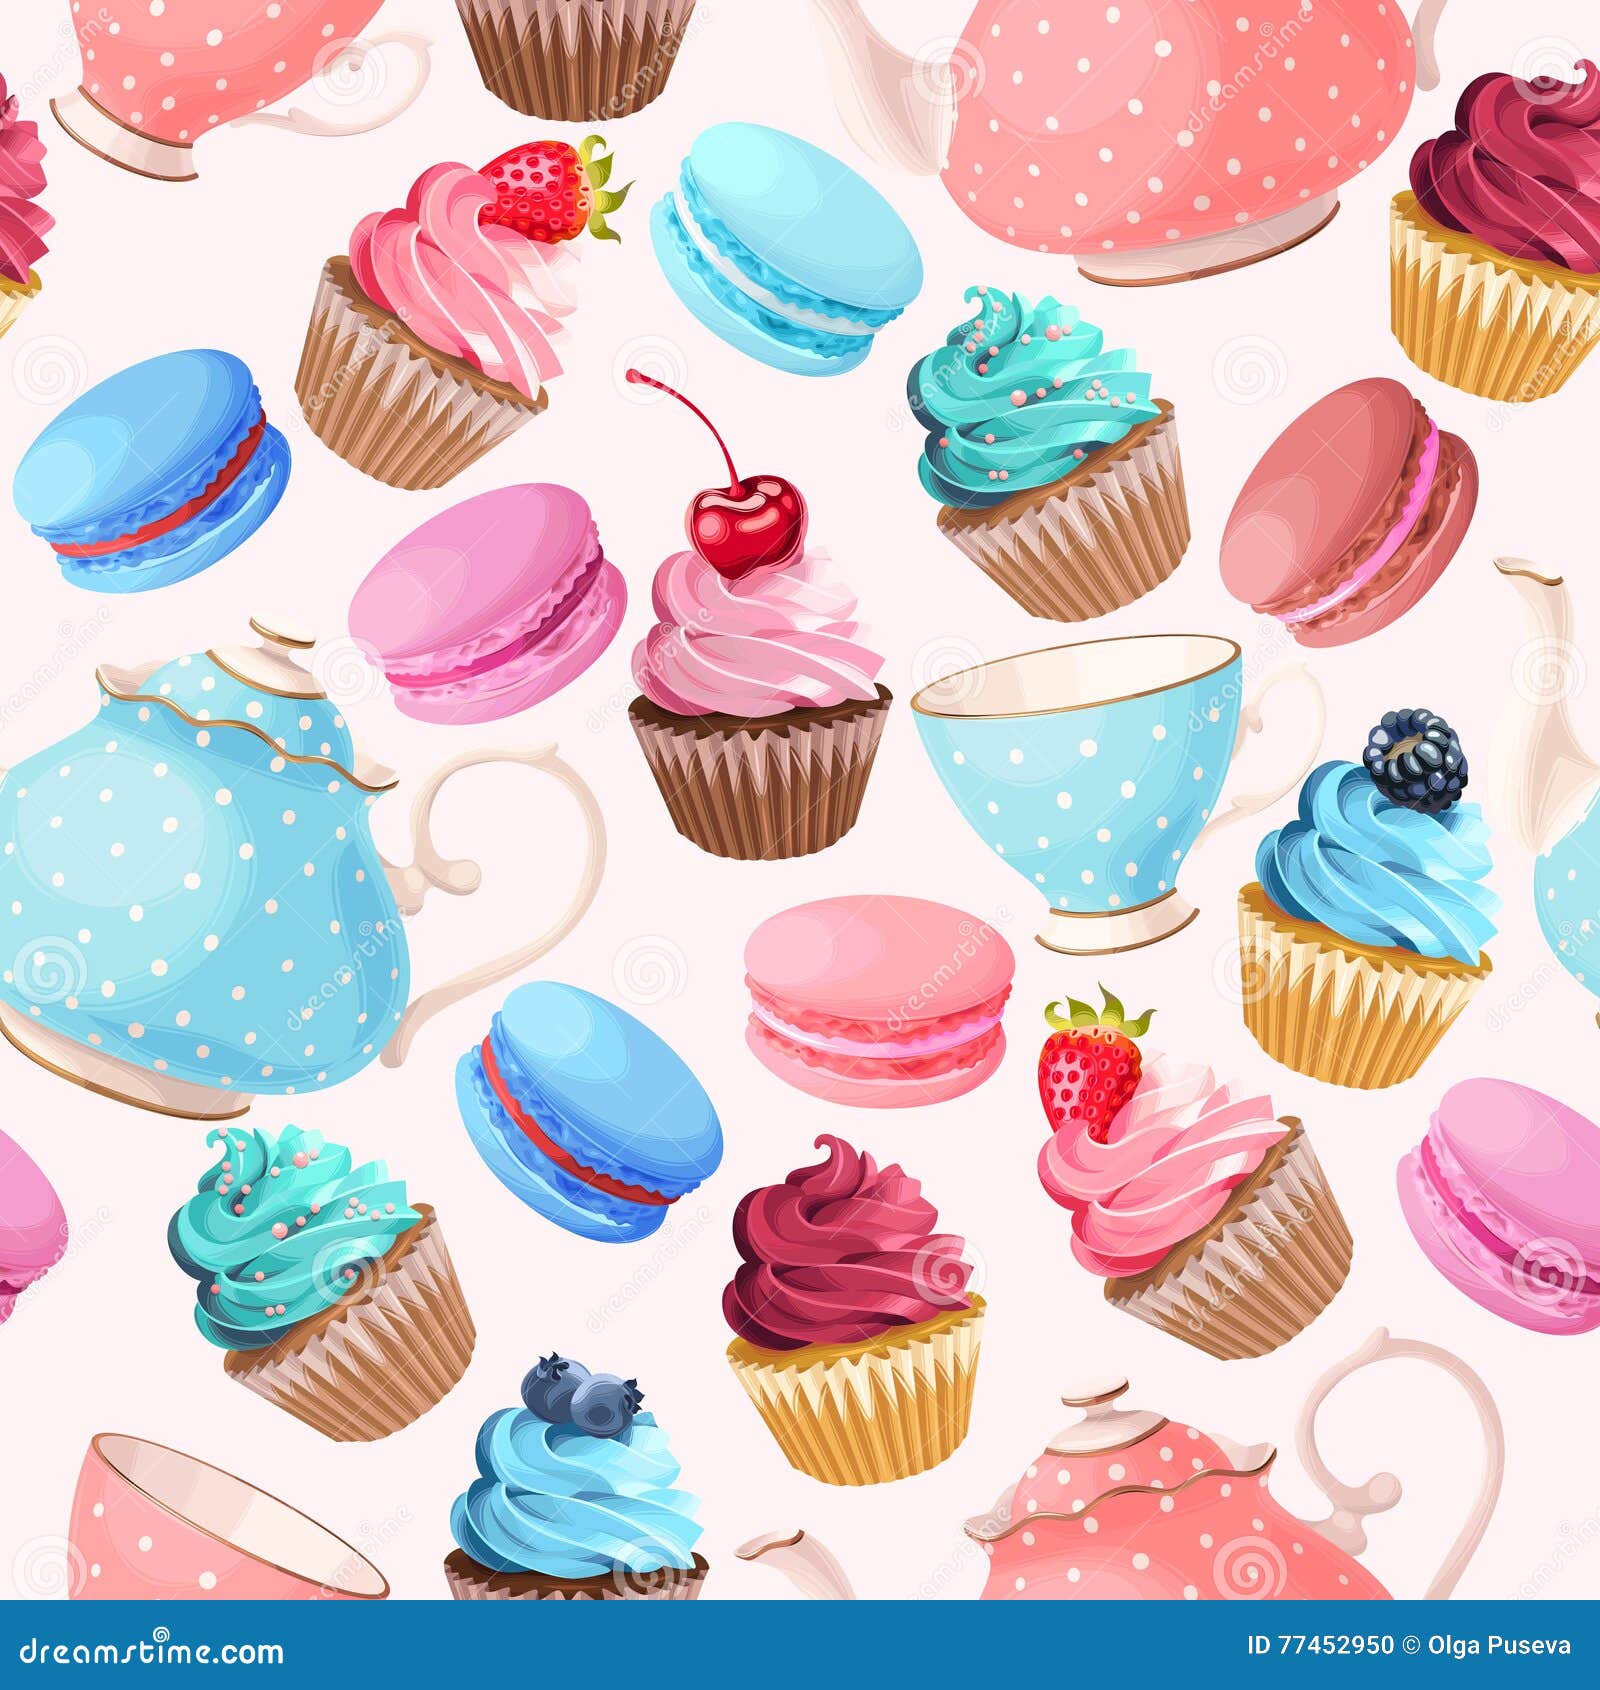 teaparty seamless background